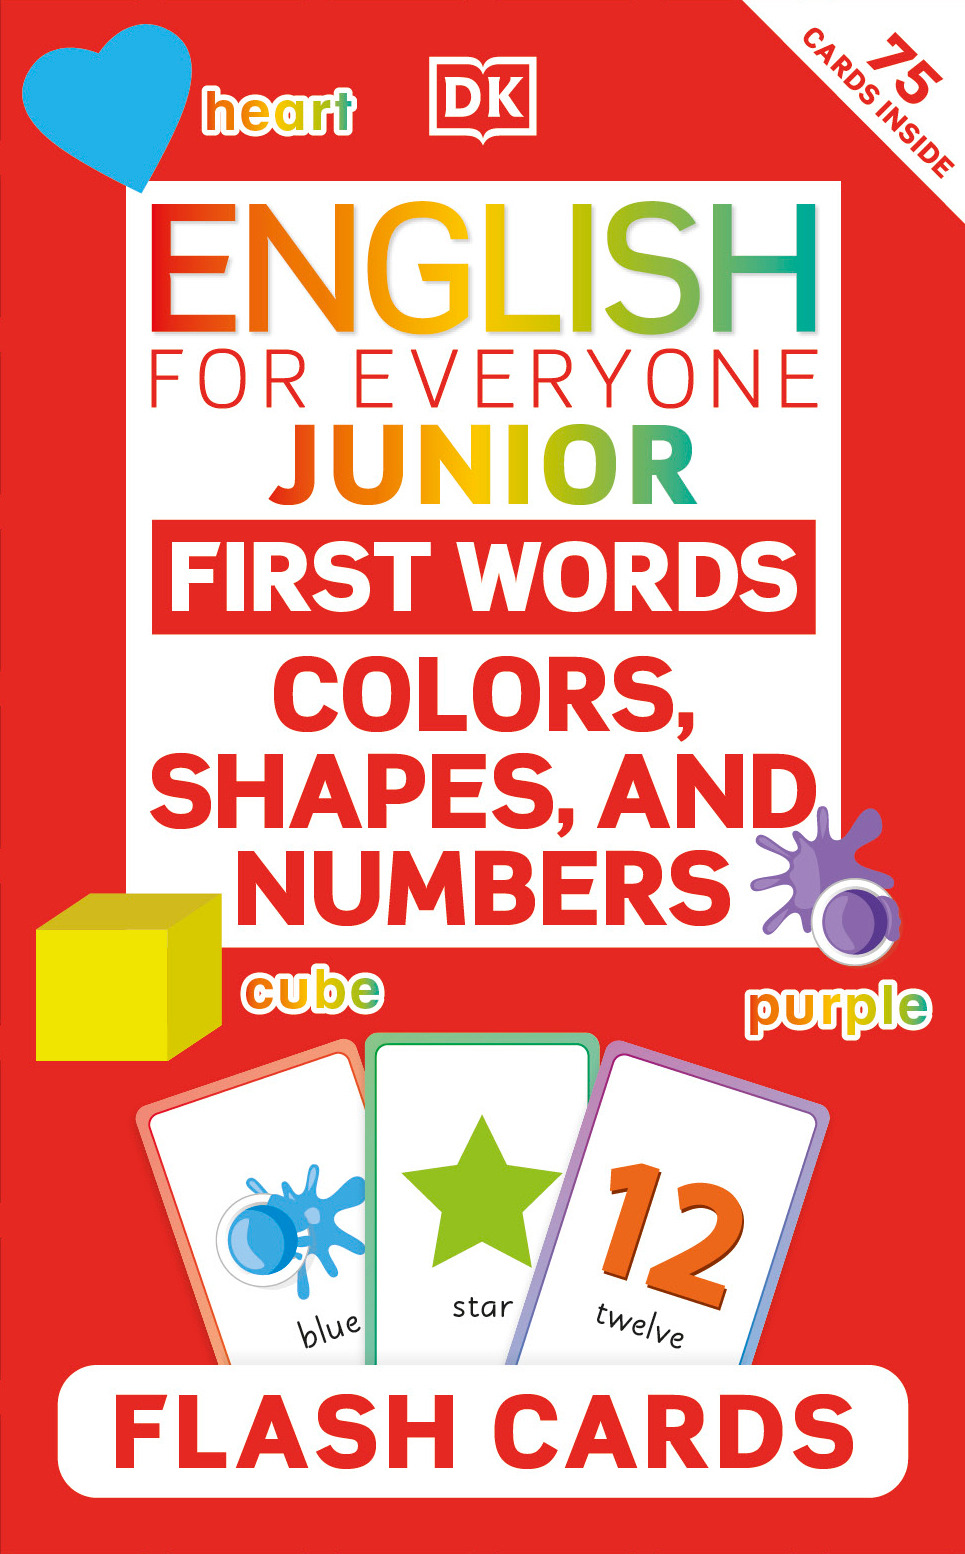 English for Everyone Junior First Words Colors, Shapes and Numbers Flash Cards | 